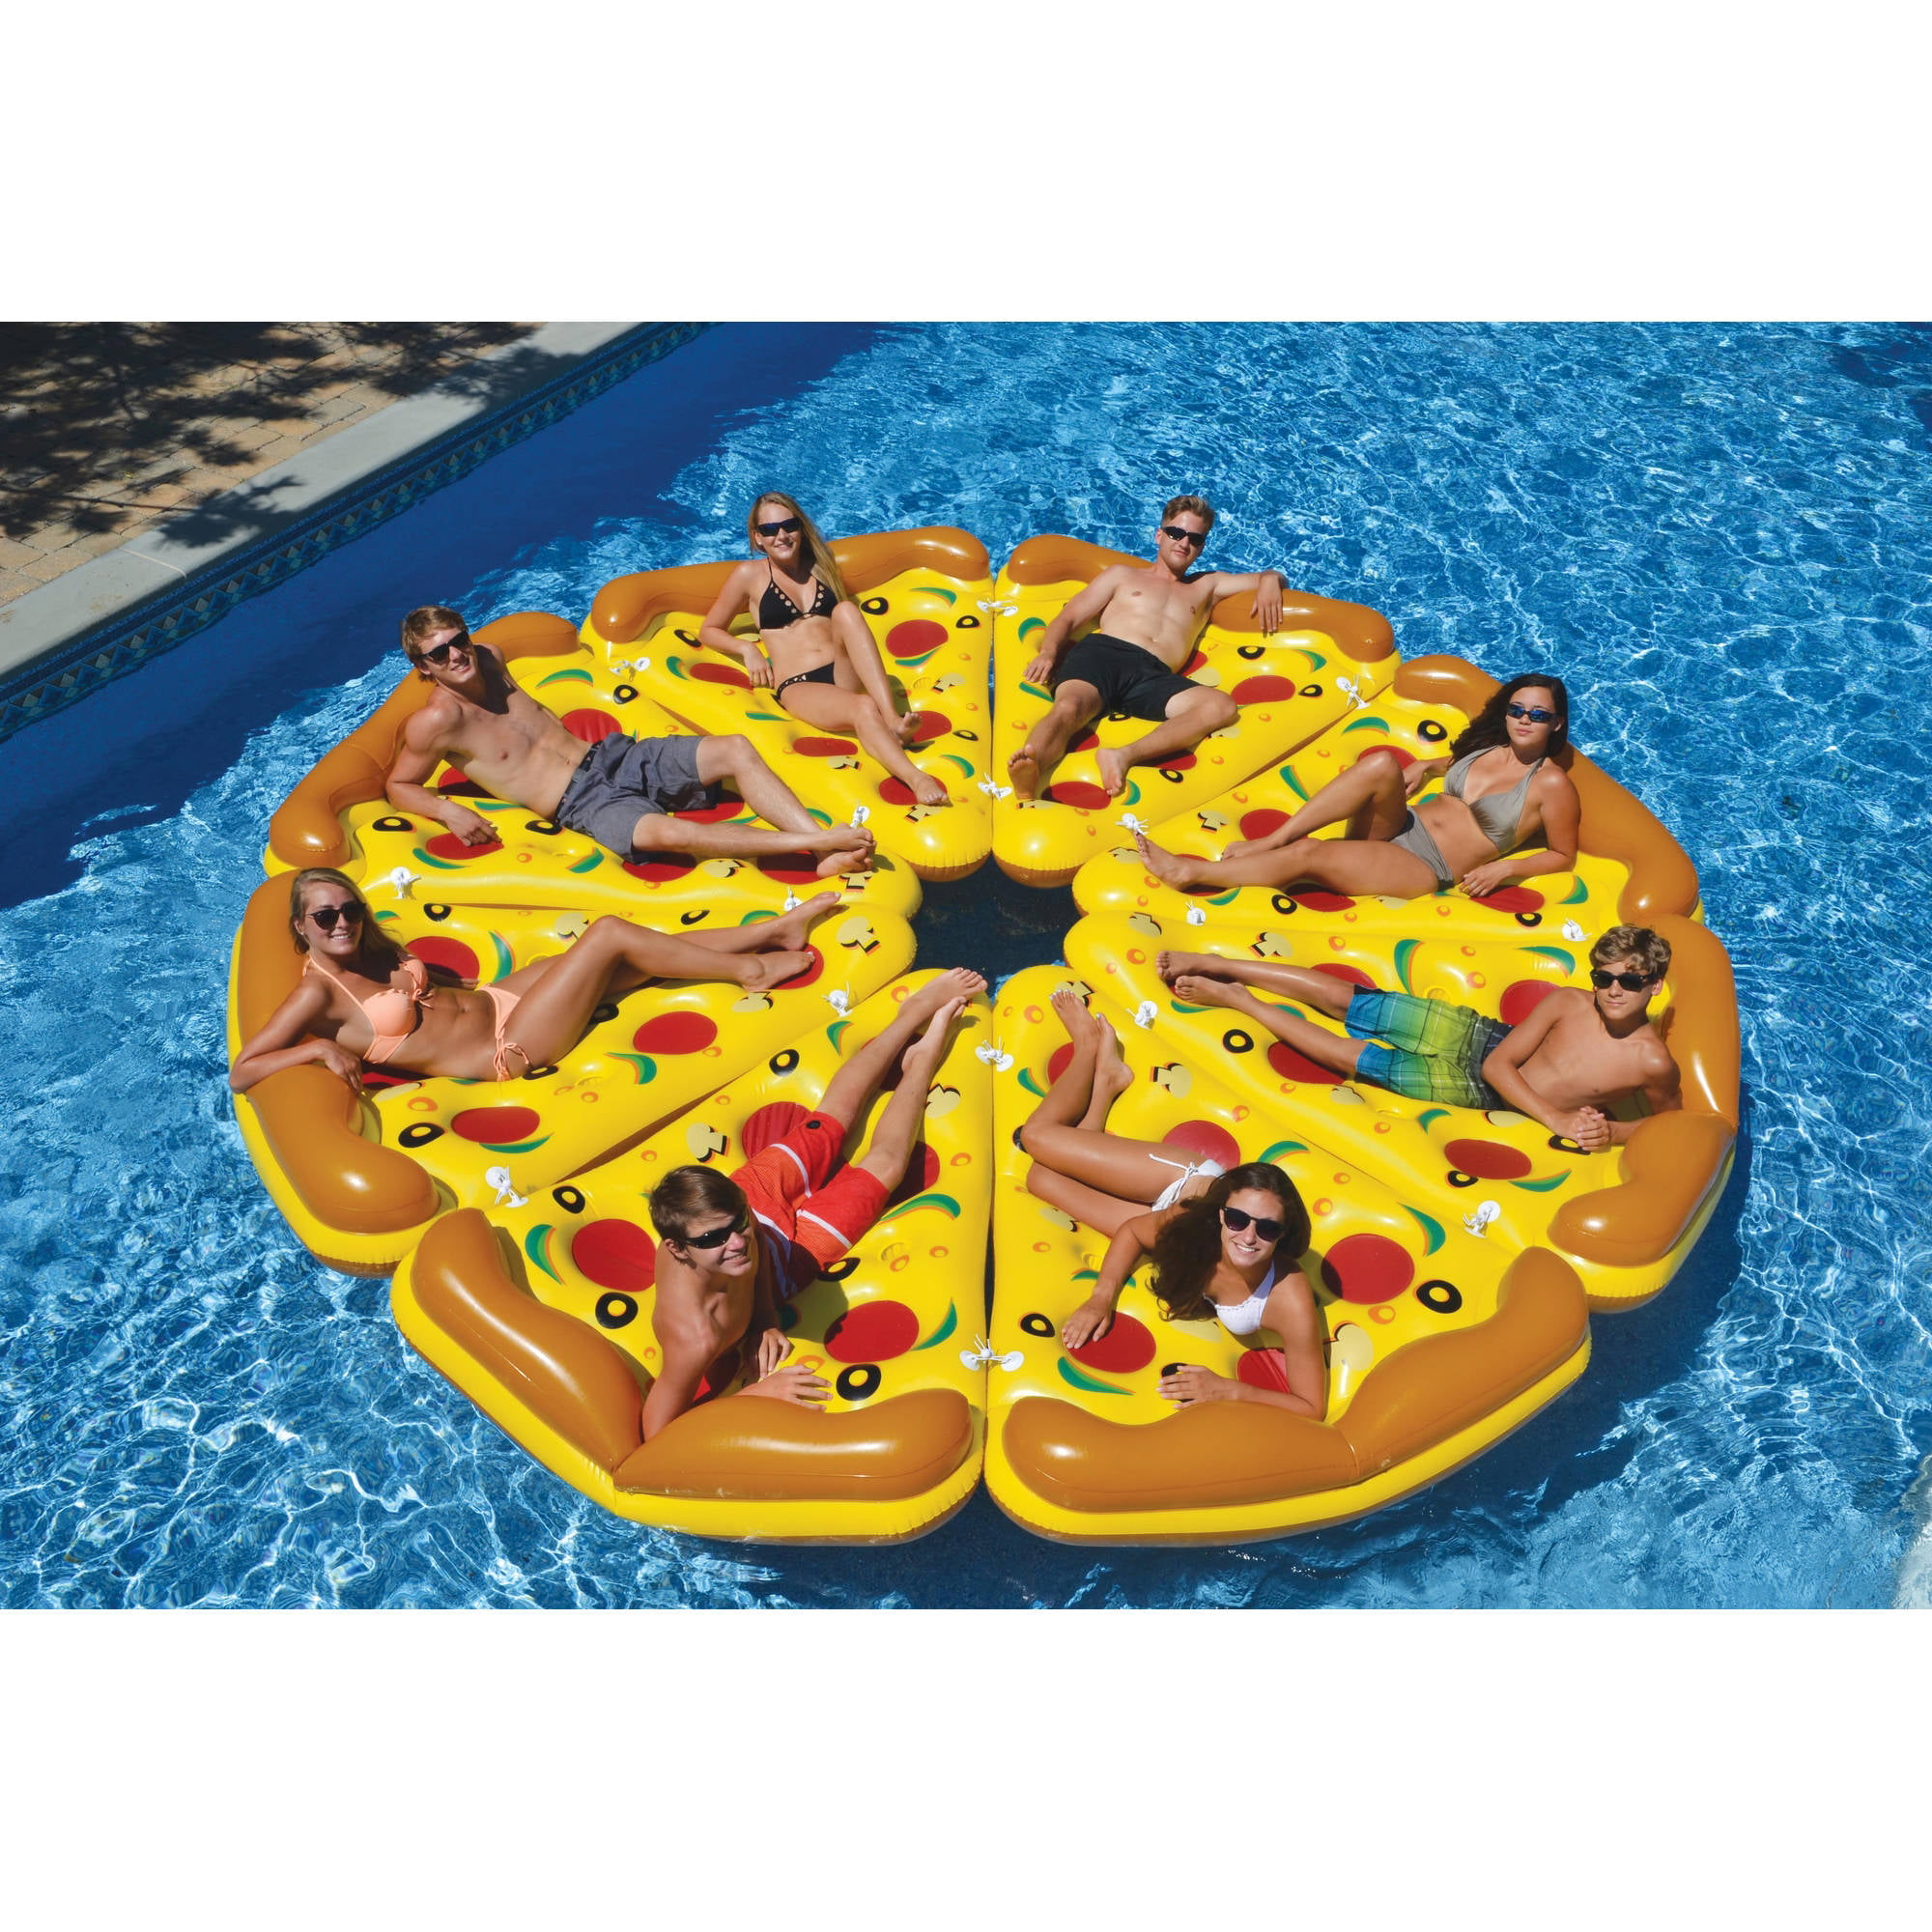 66" Inflatable Pizza Water Float Raft Swimming Pool Lounger Beach Fun Sports 